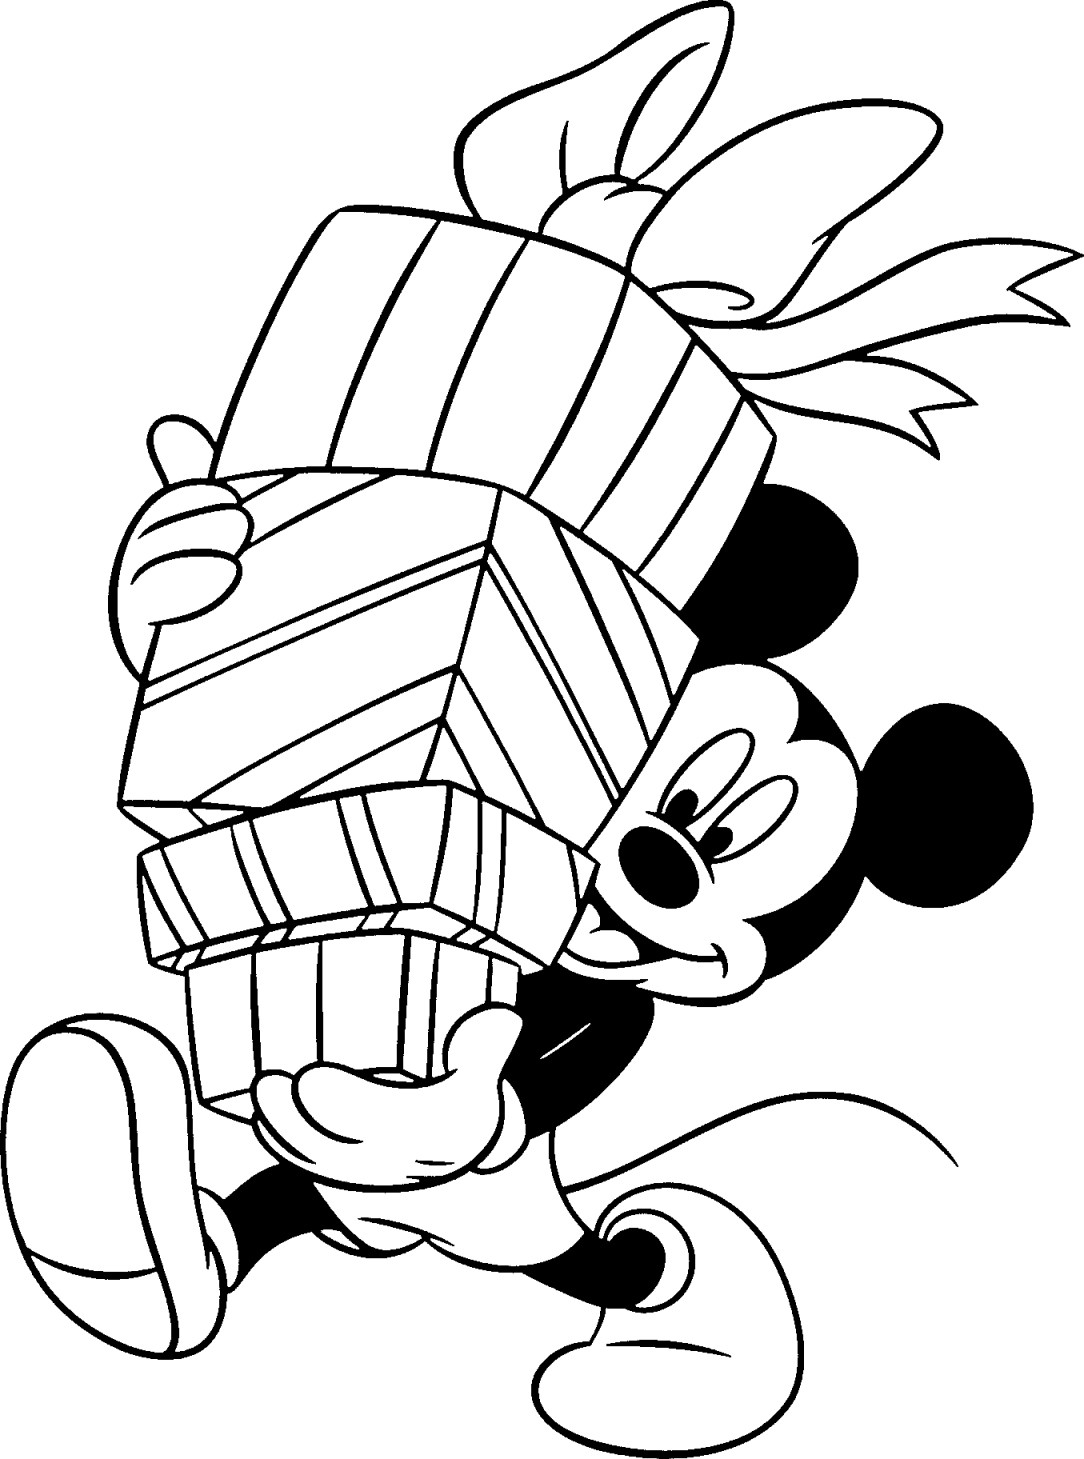 Disney Printable Coloring Pages
 Coloring Pages Christmas Disney Disney Coloring Pages